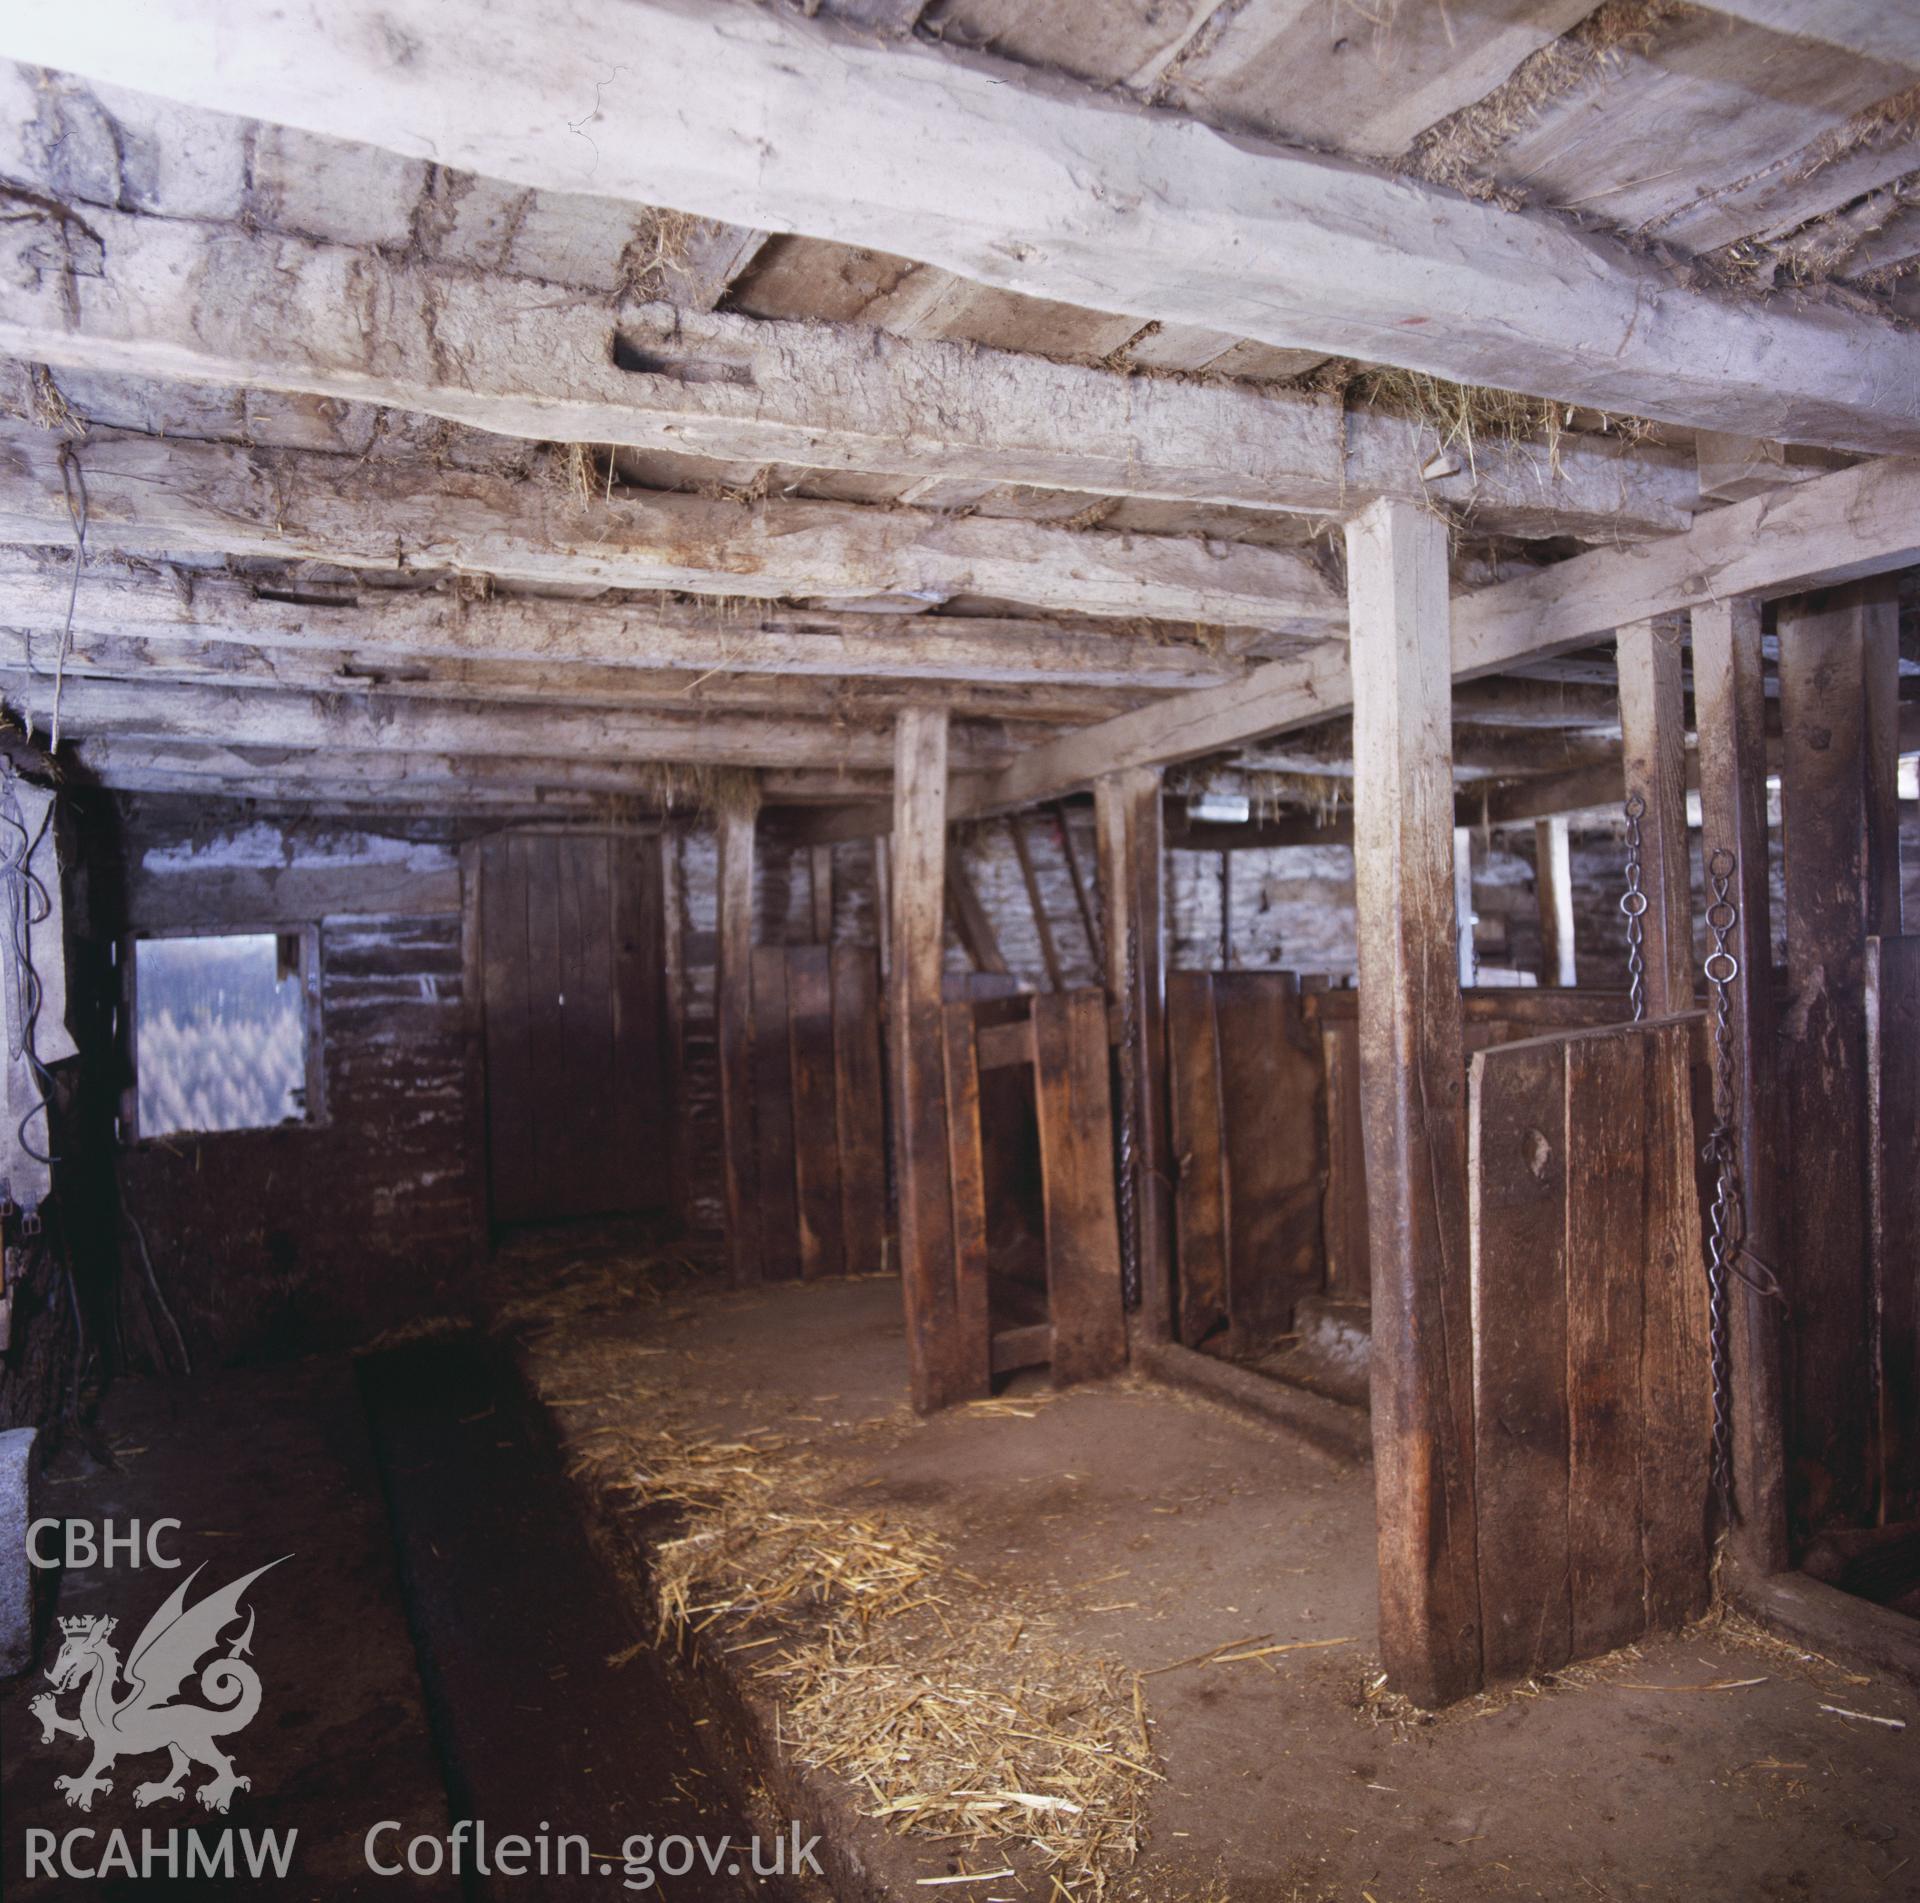 RCAHMW colour transparency showing stalls in a barn at Lower Nantserth Farm.